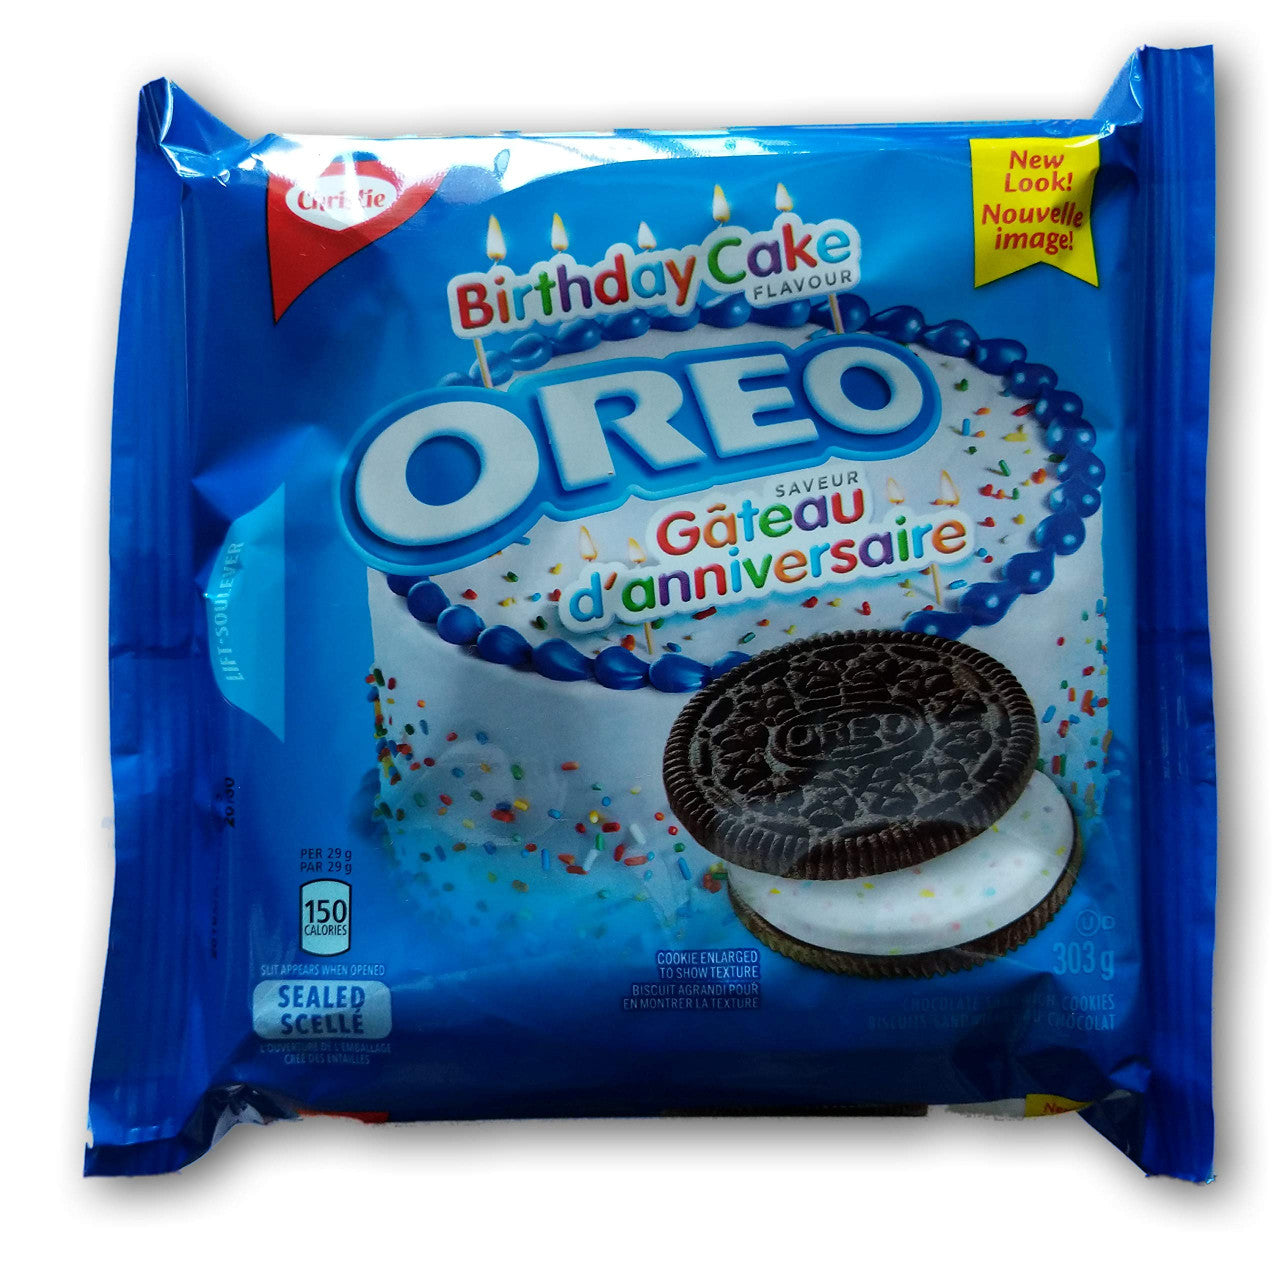 Christie Oreo Birthday Cake Flavour Cookies 303g/10.7 oz., (3 Pack) {Imported from Canada}